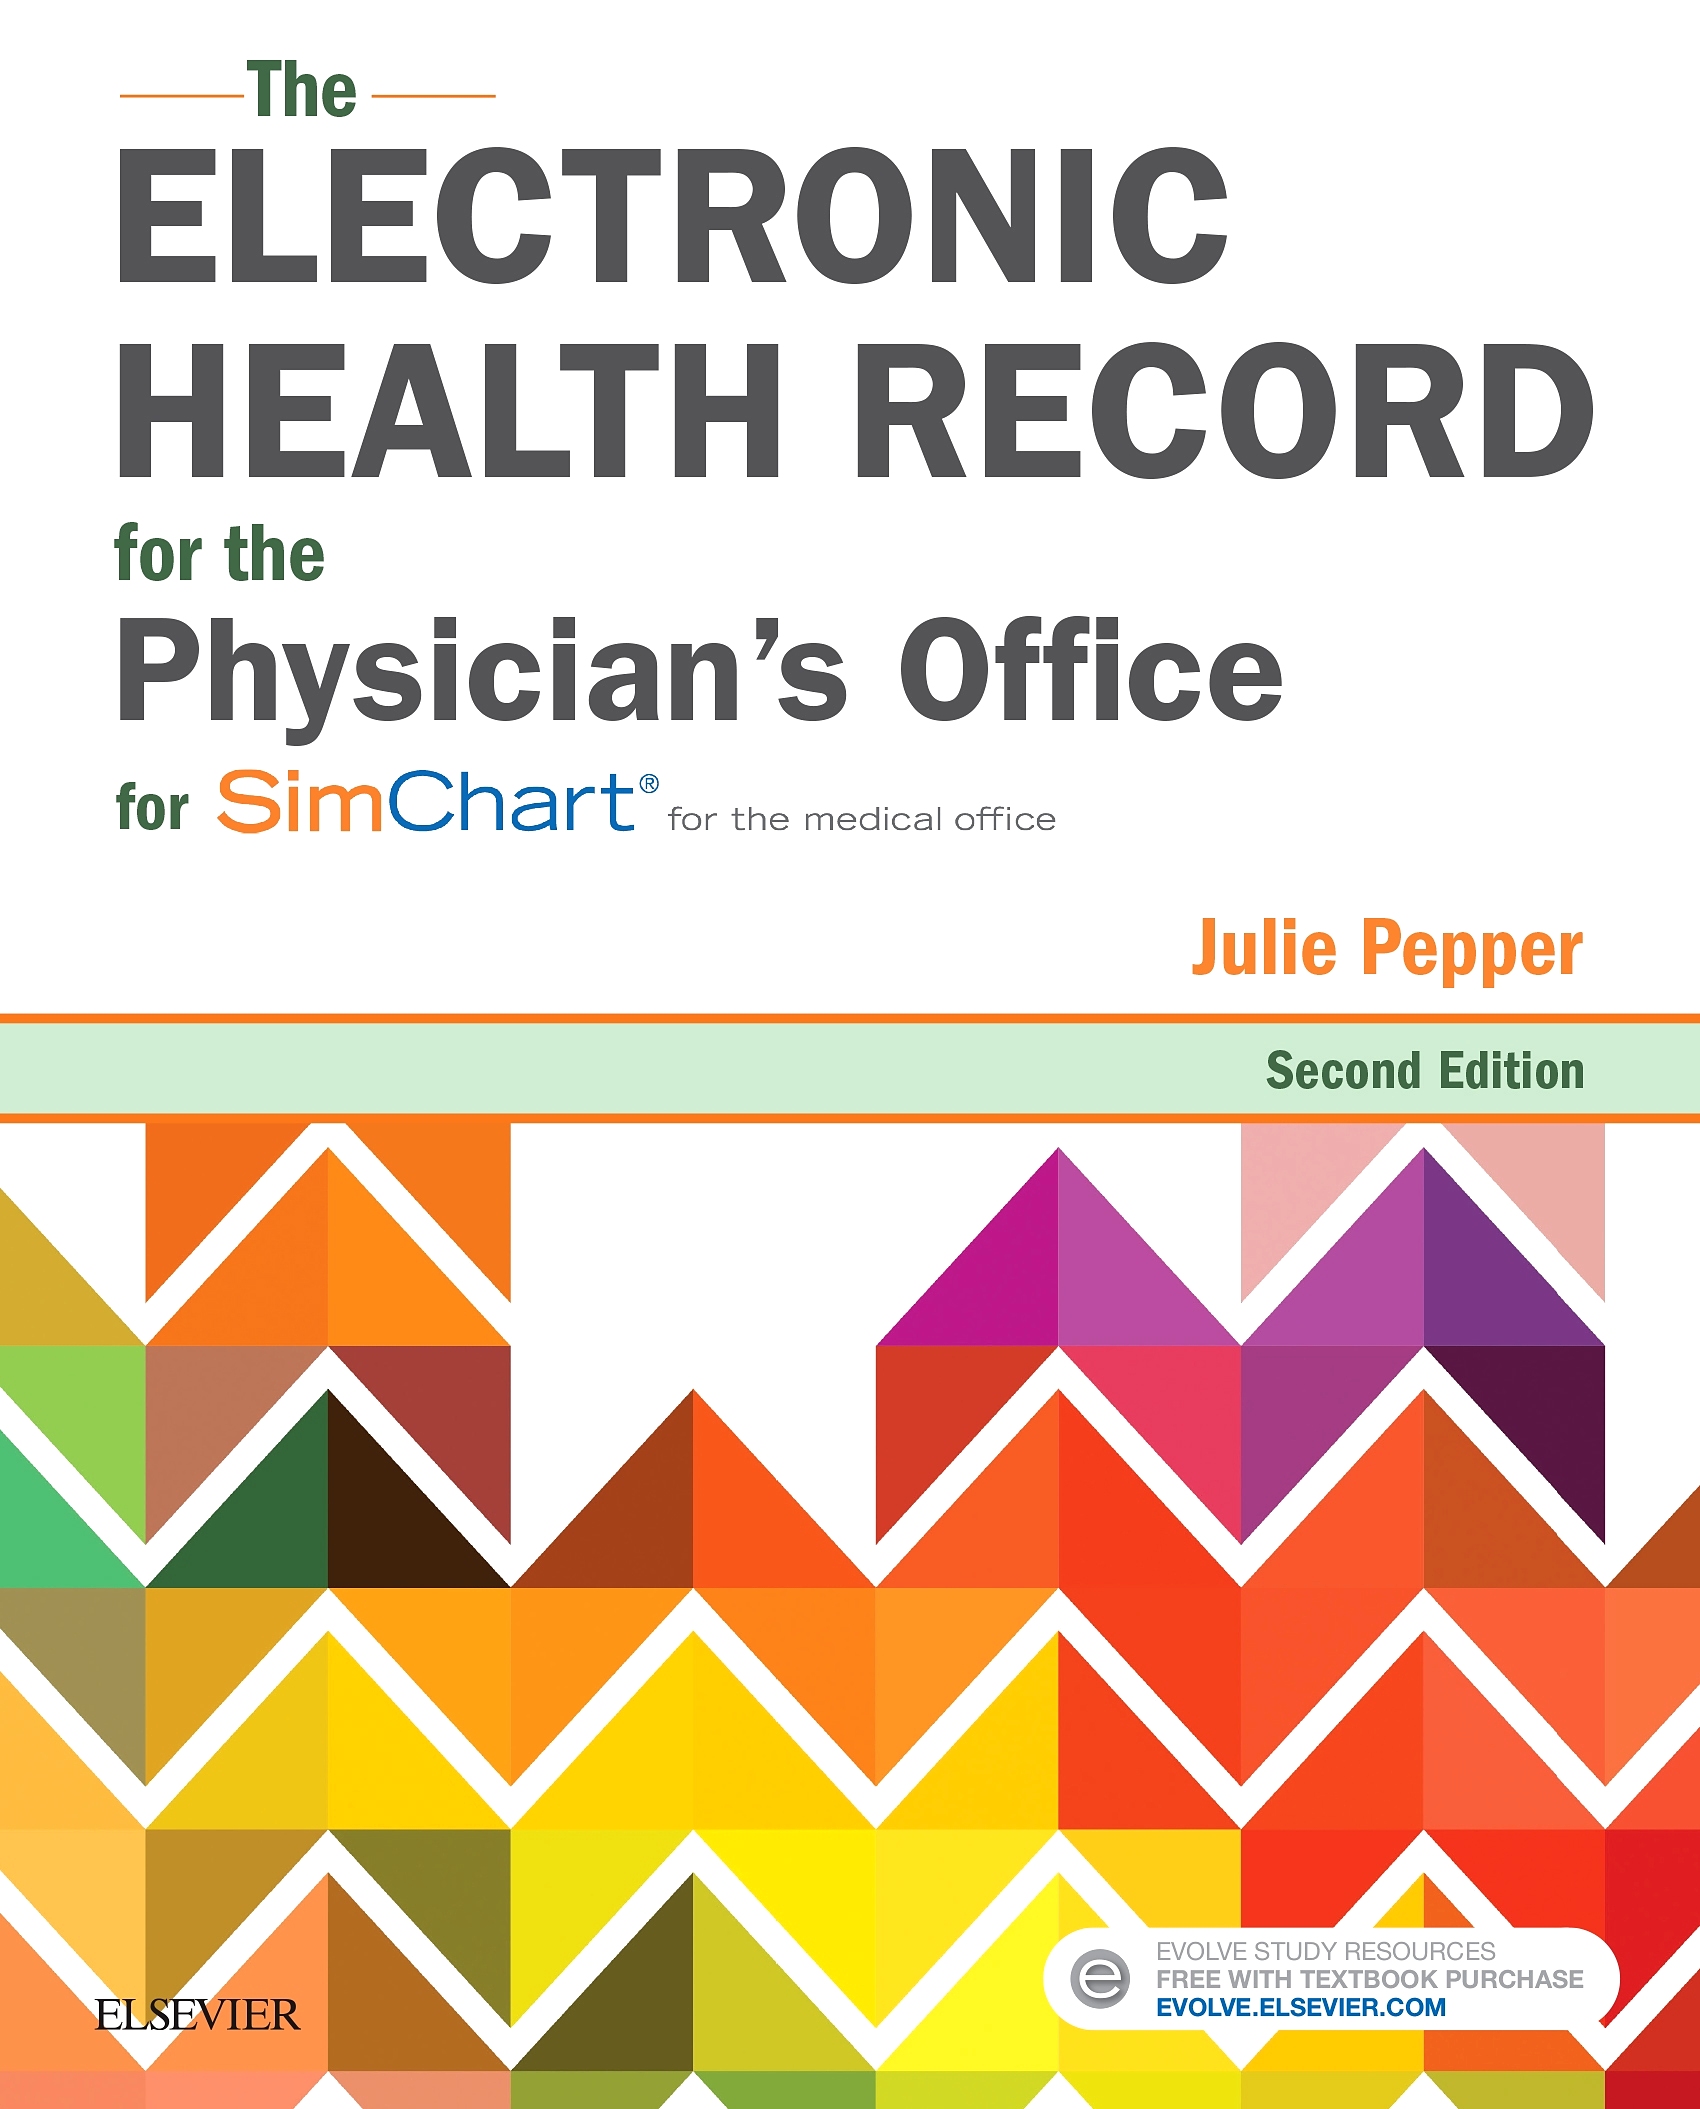 Evolve Resources for The Electronic Health Record for the Physician’s Office, 2nd Edition